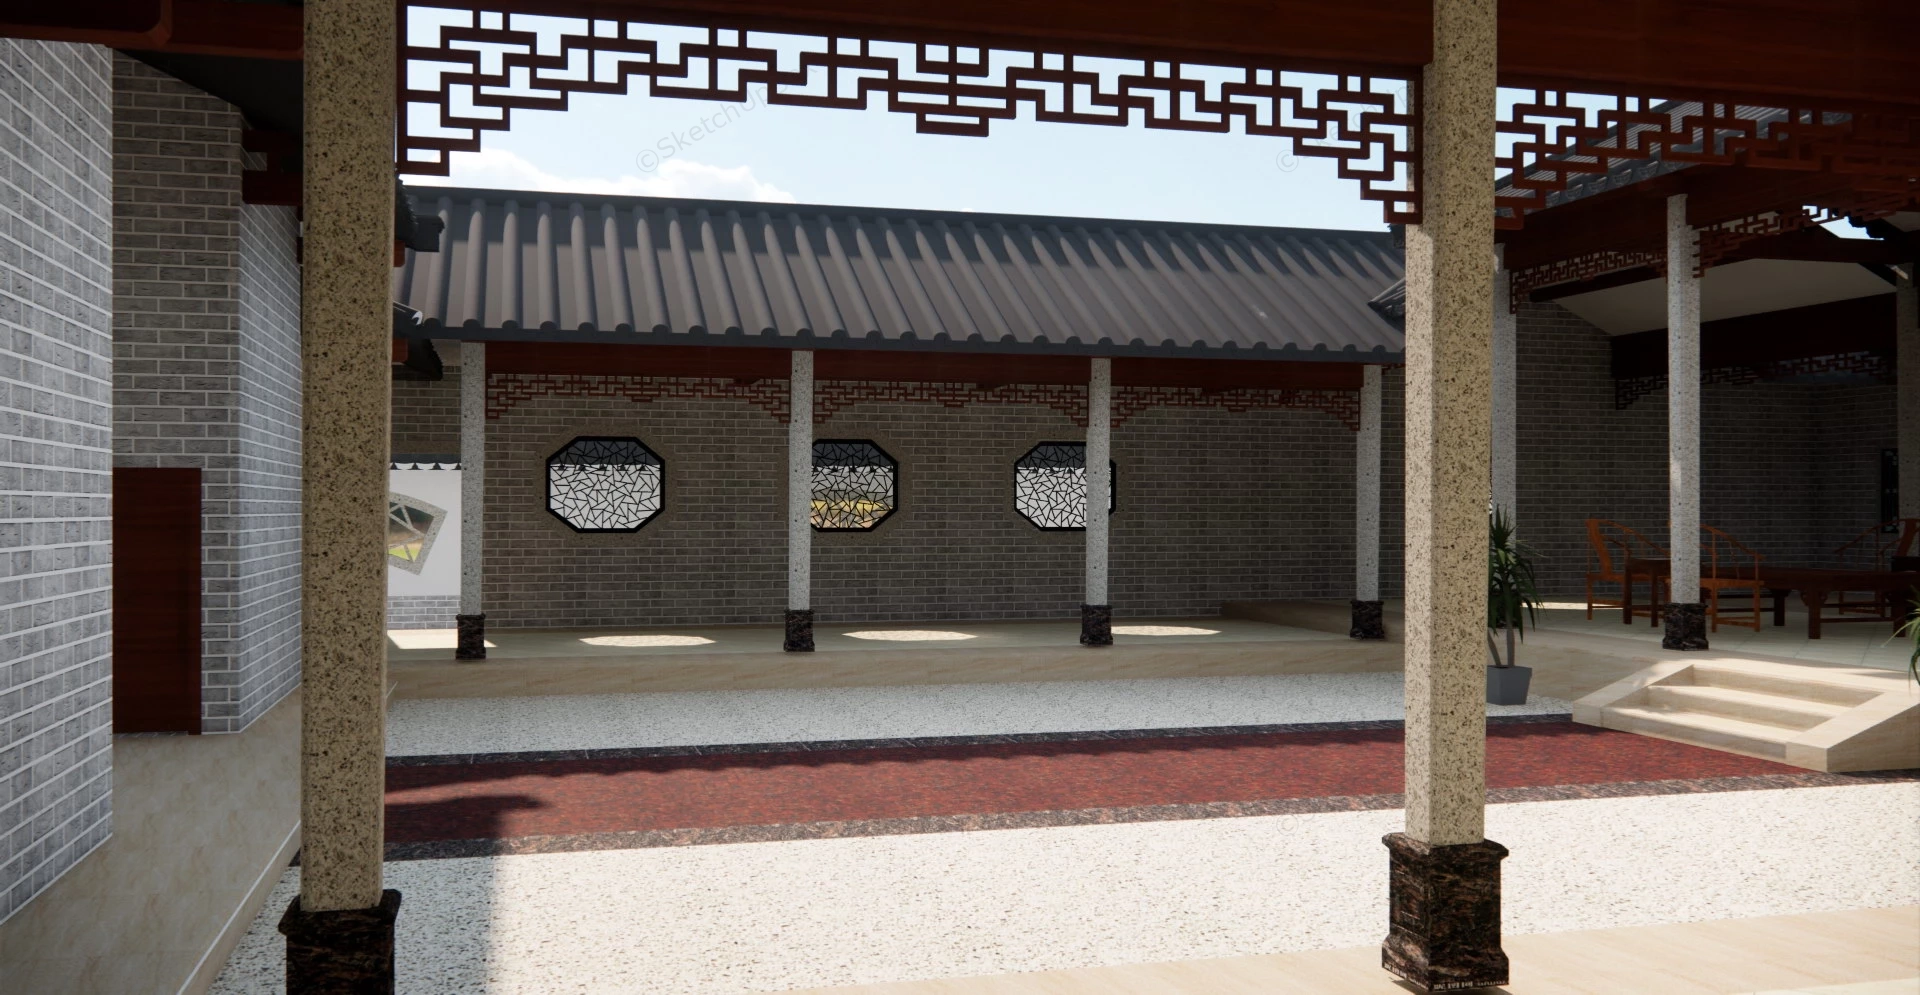 Traditional Chinese Courtyard House sketchup model preview - SketchupBox